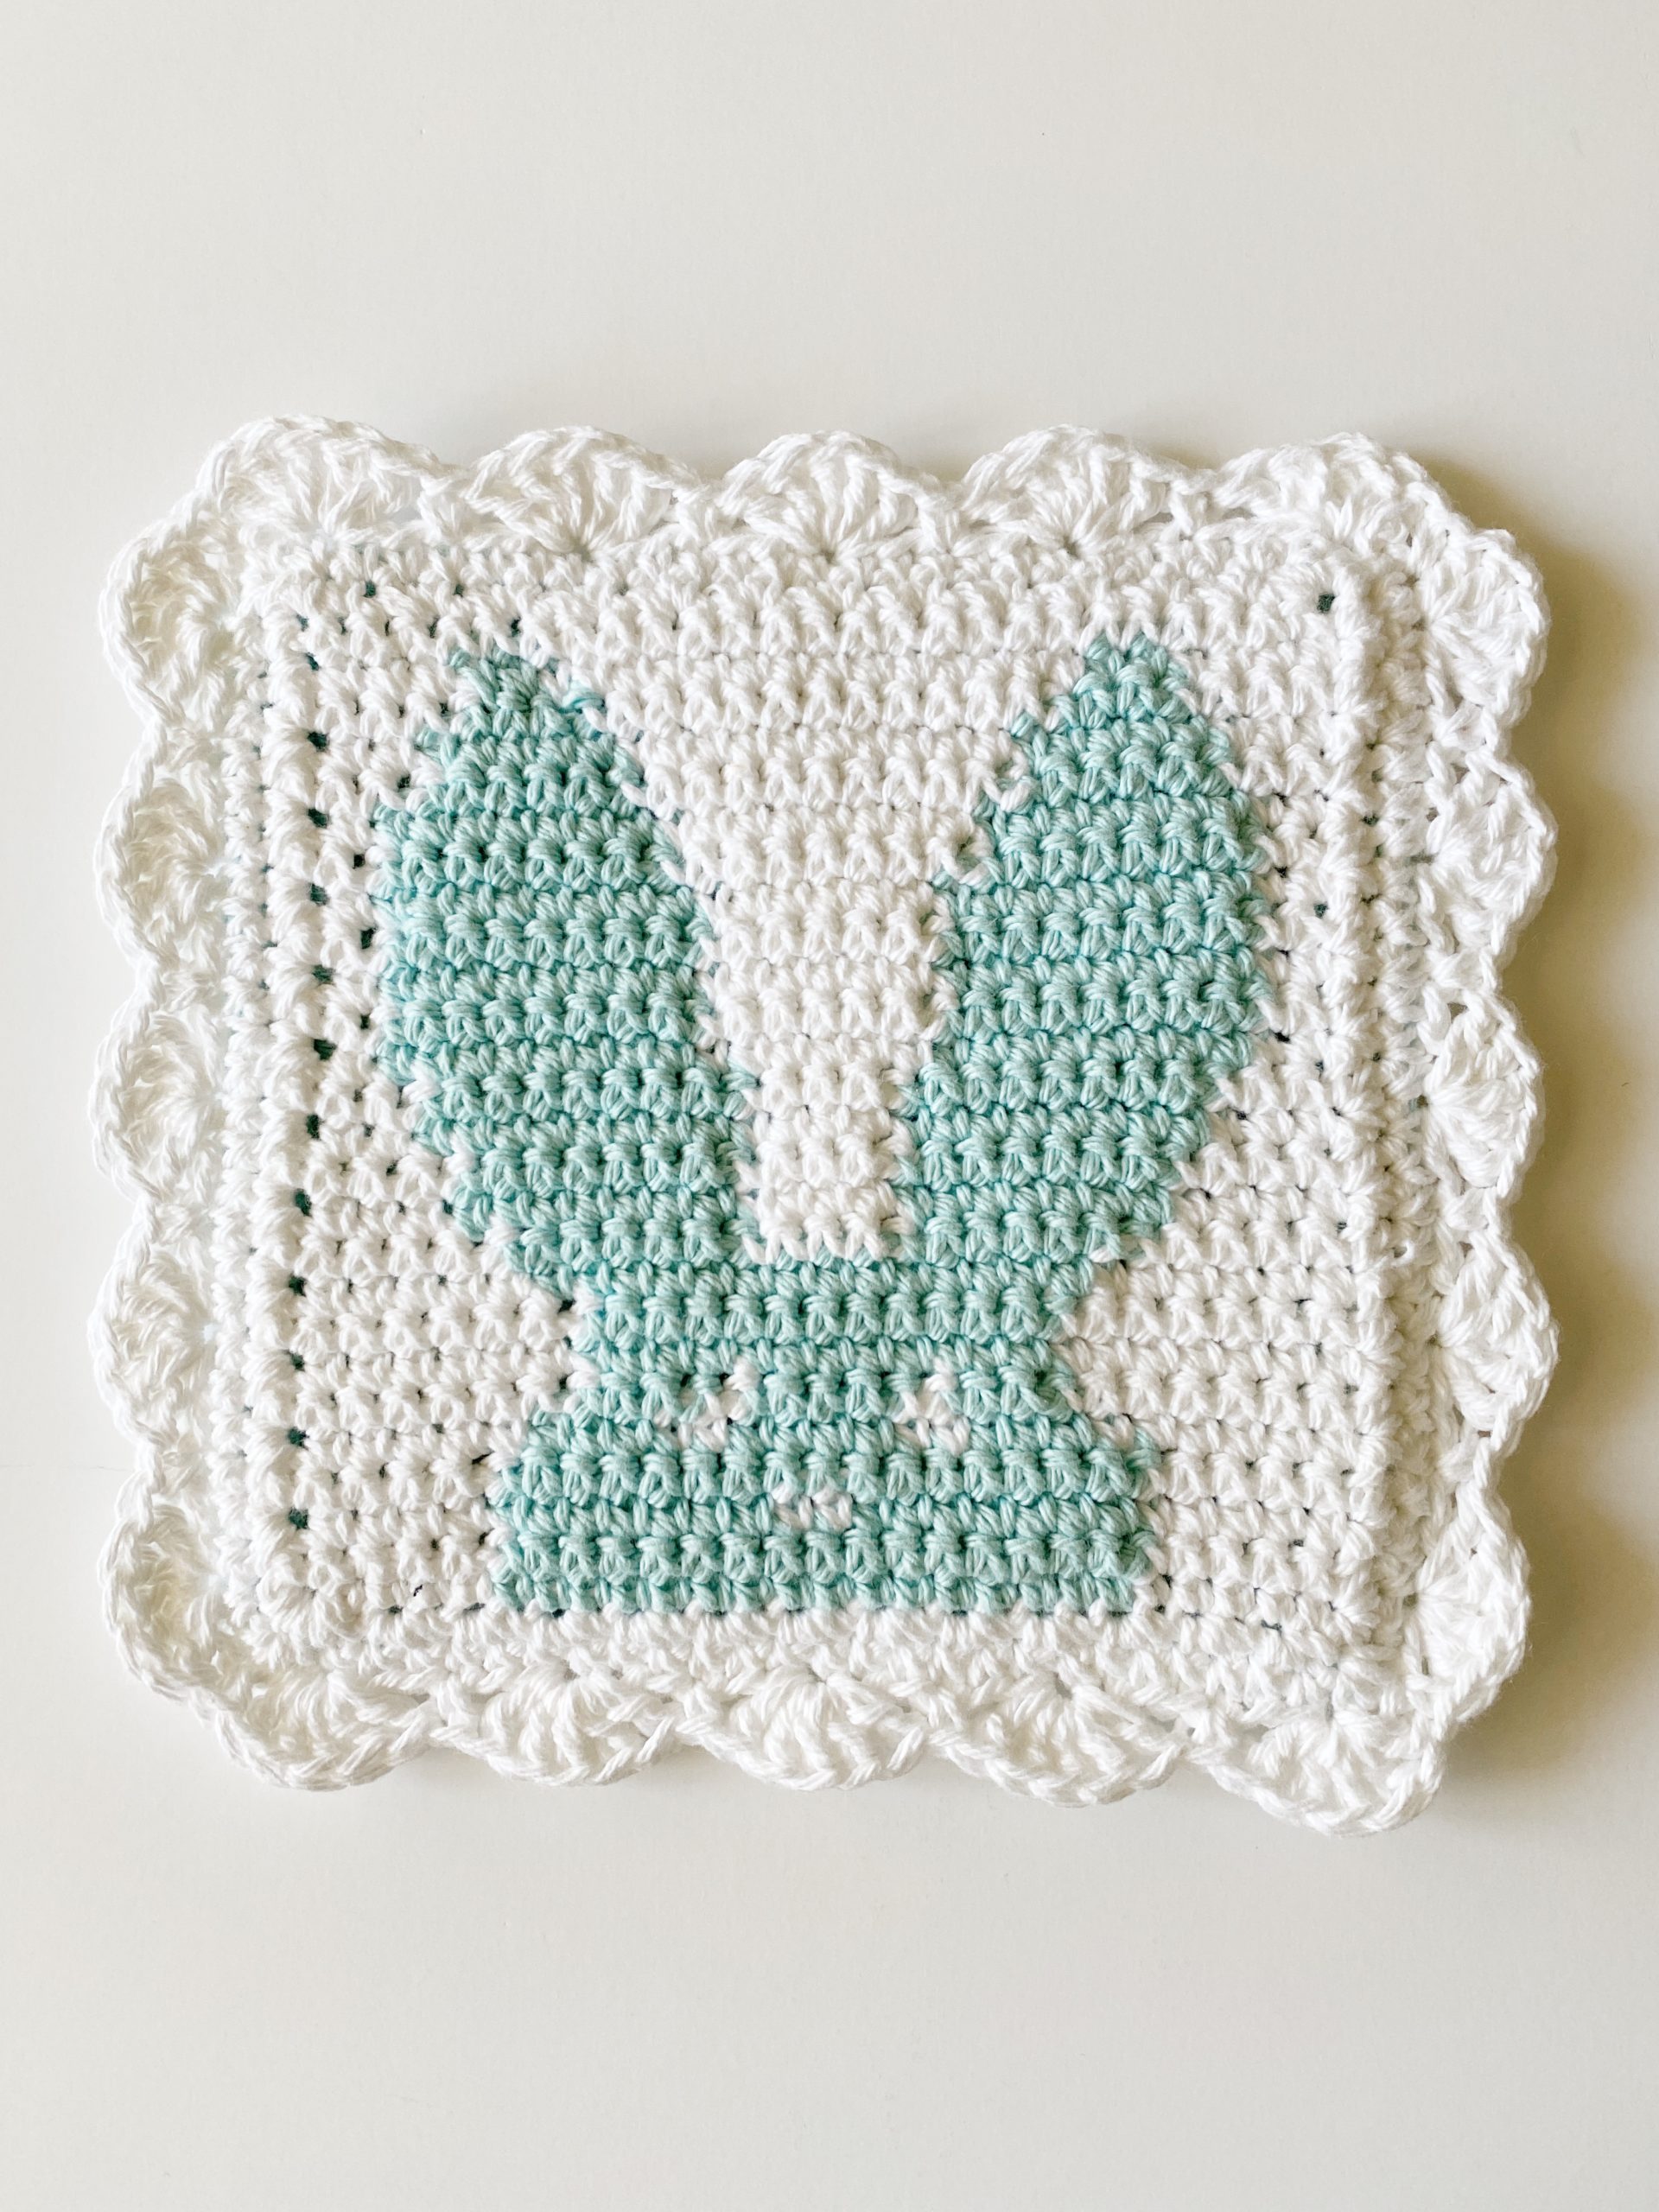 Art in the Kitchen: Crochet Potholders and Hot Pads